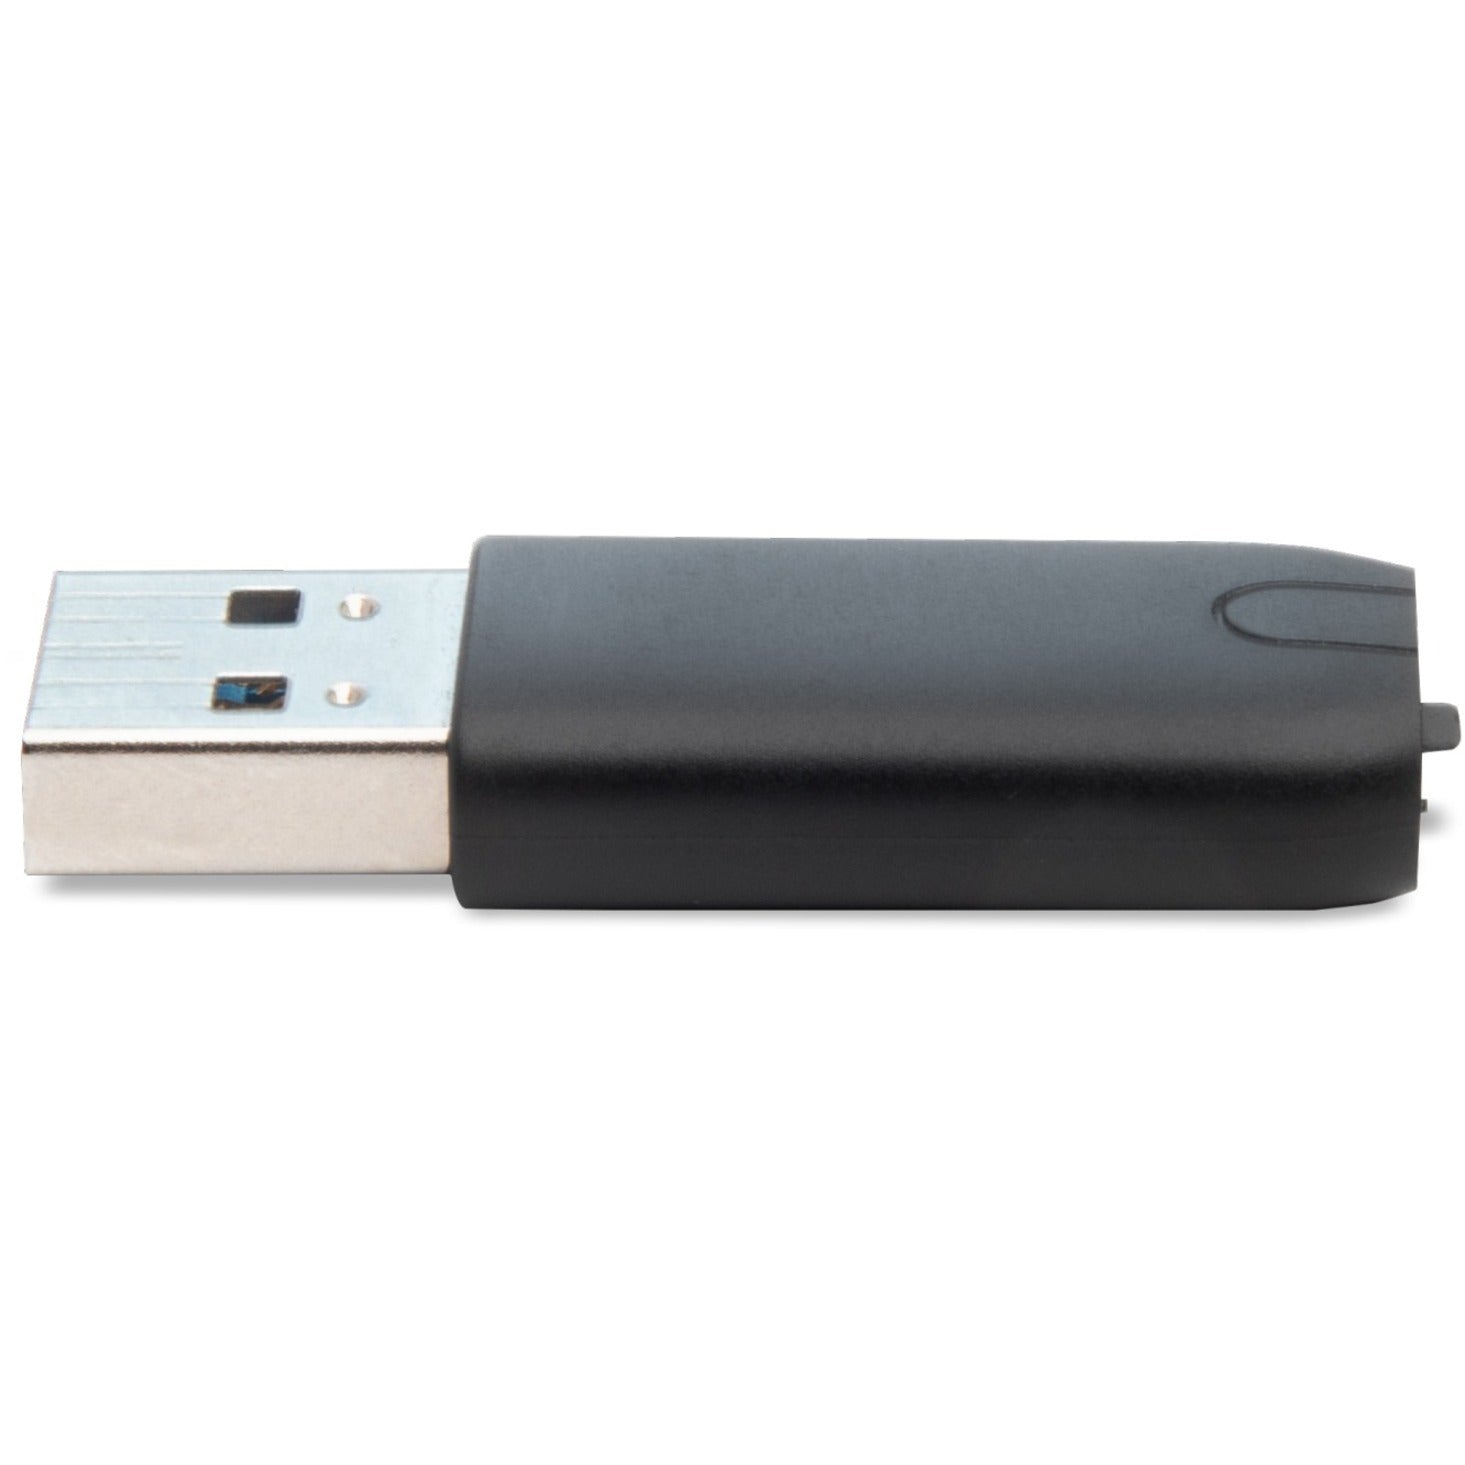 Crucial CTUSBCFUSBAMAD USB-C to USB-A Adapter, Data Transfer Adapter